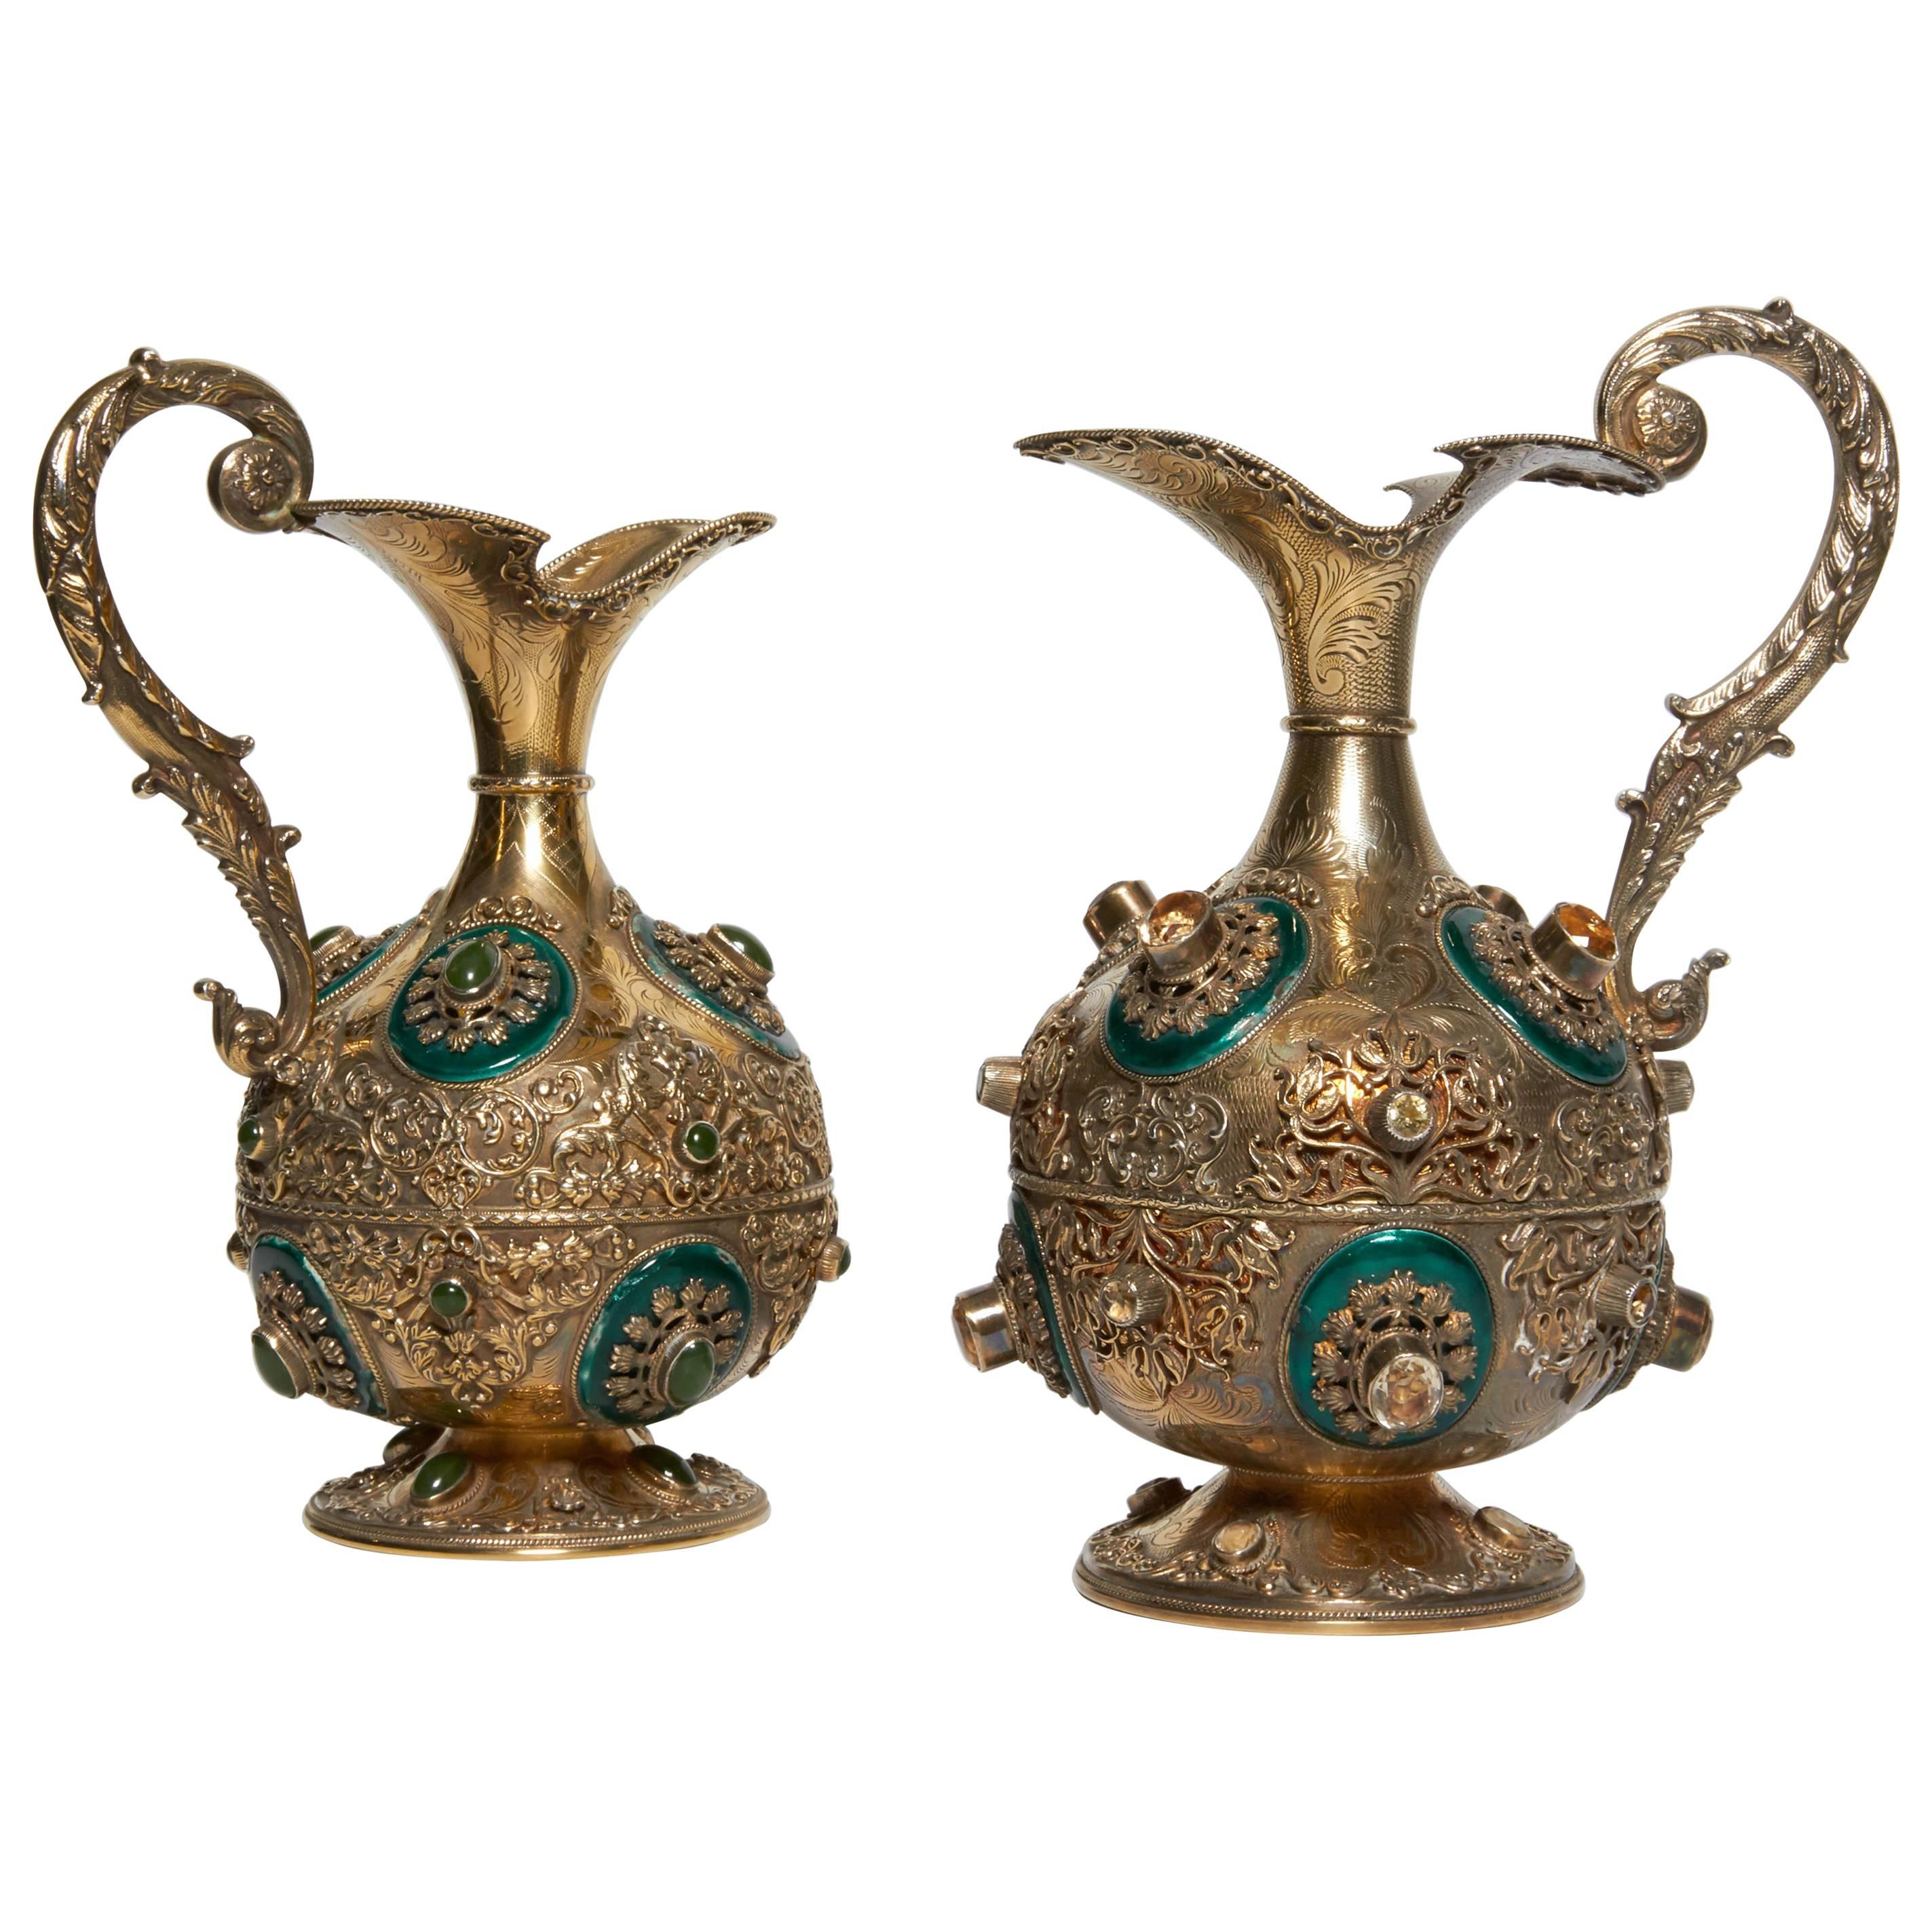 Fine Pair of Antique Austrian Enamel on Silver and Gold Jeweled Ewers For Sale